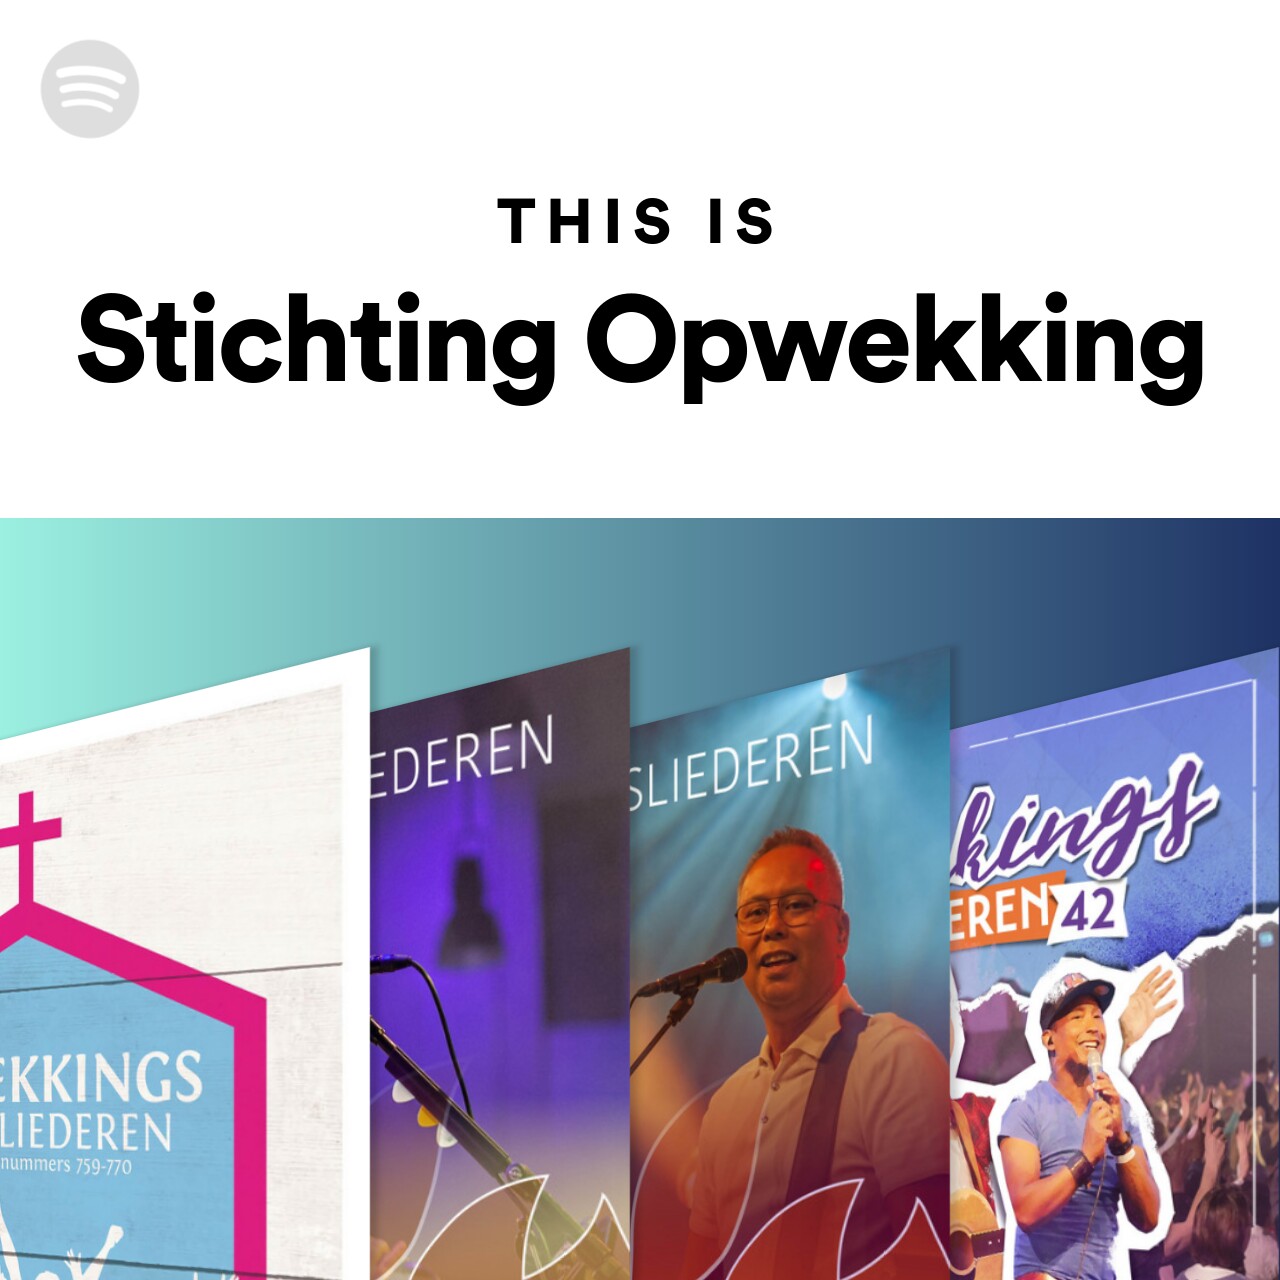 This Is Stichting Opwekking